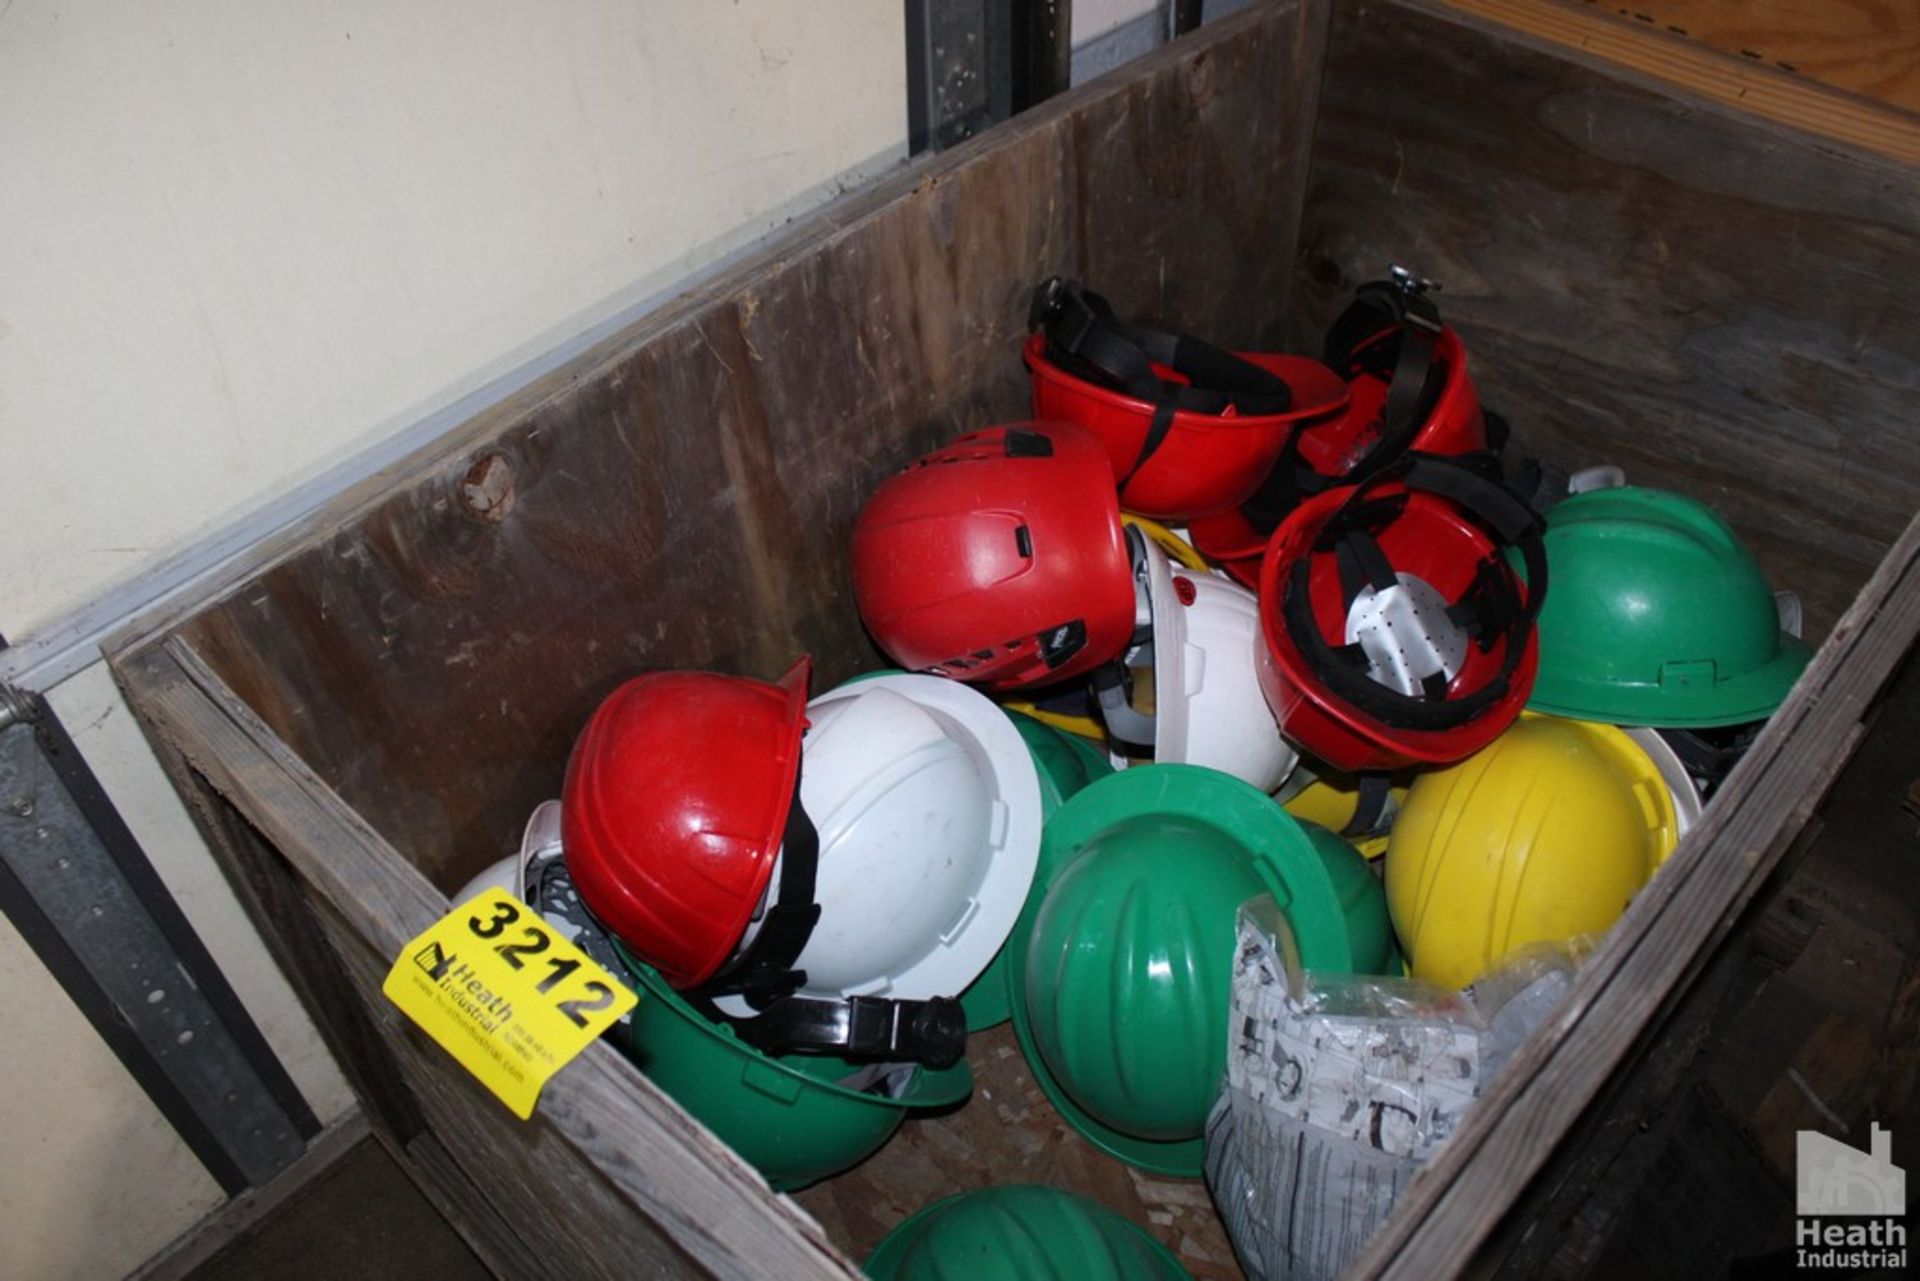 ASSORTED HARD HATS IN CRATE